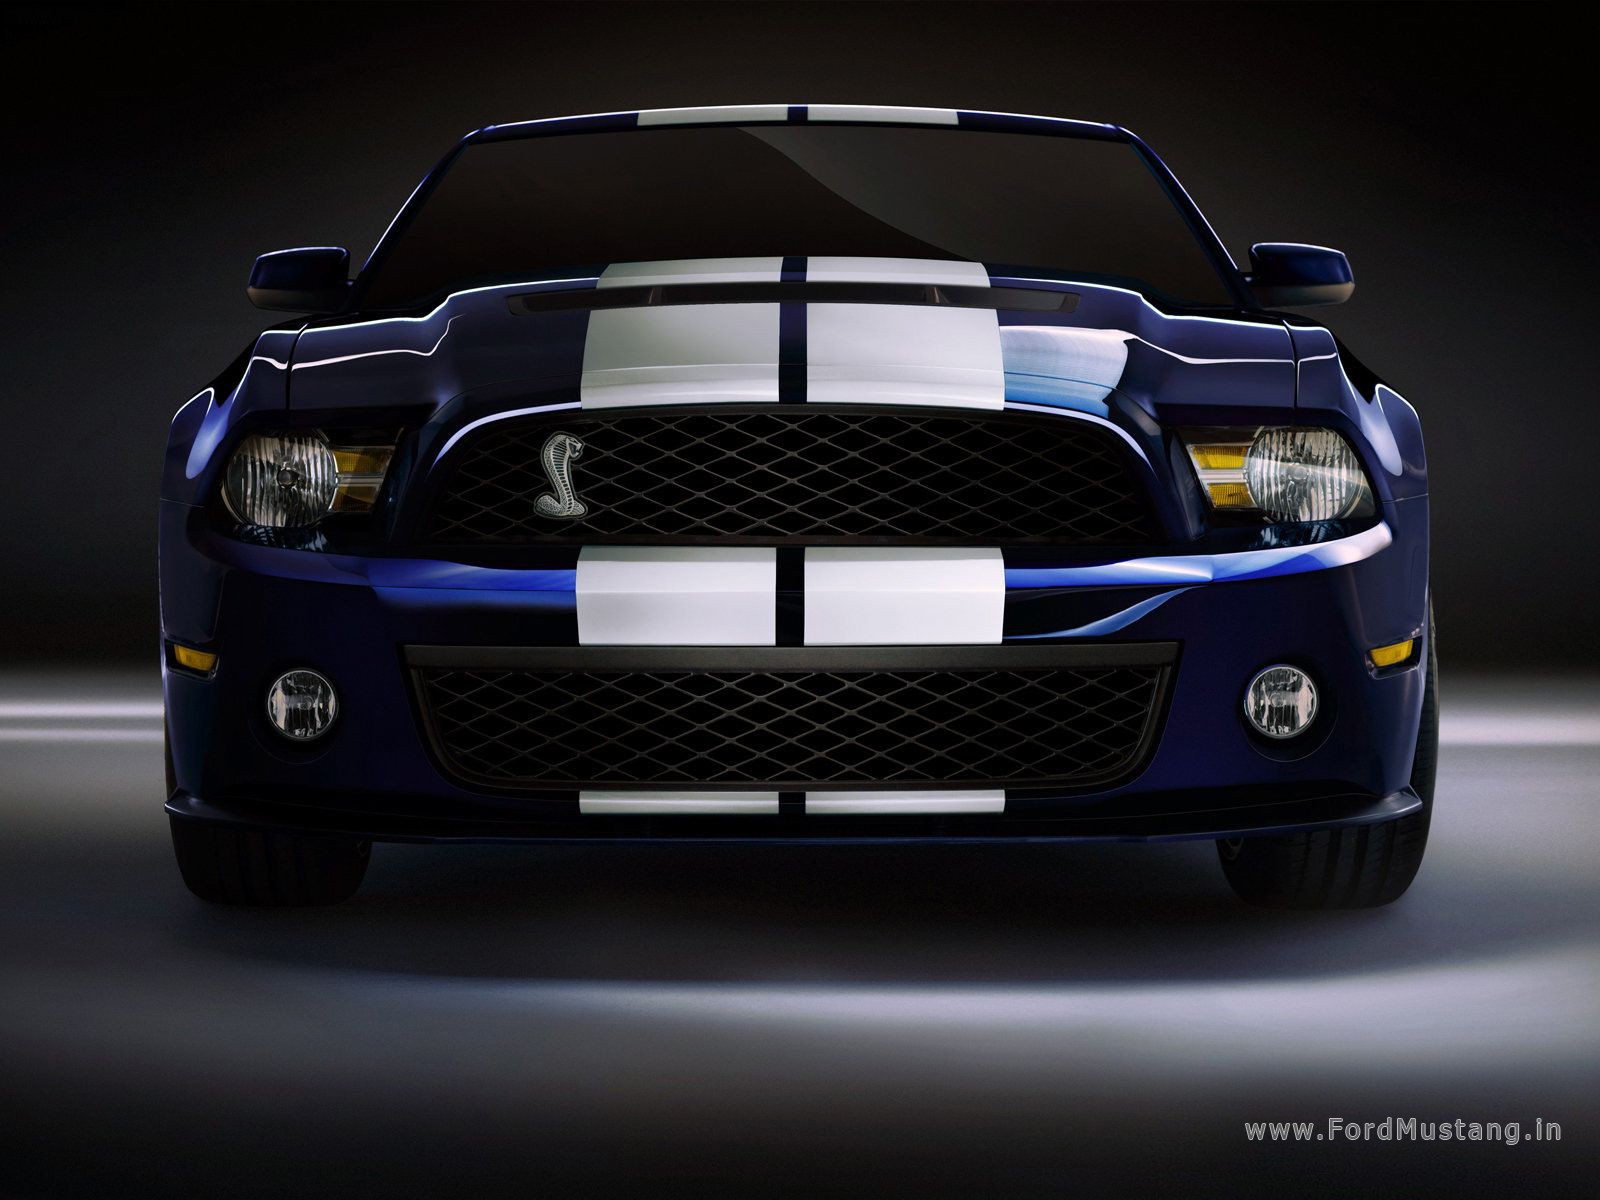 Ford Mustang Shelby Gt500 Wallpaper More